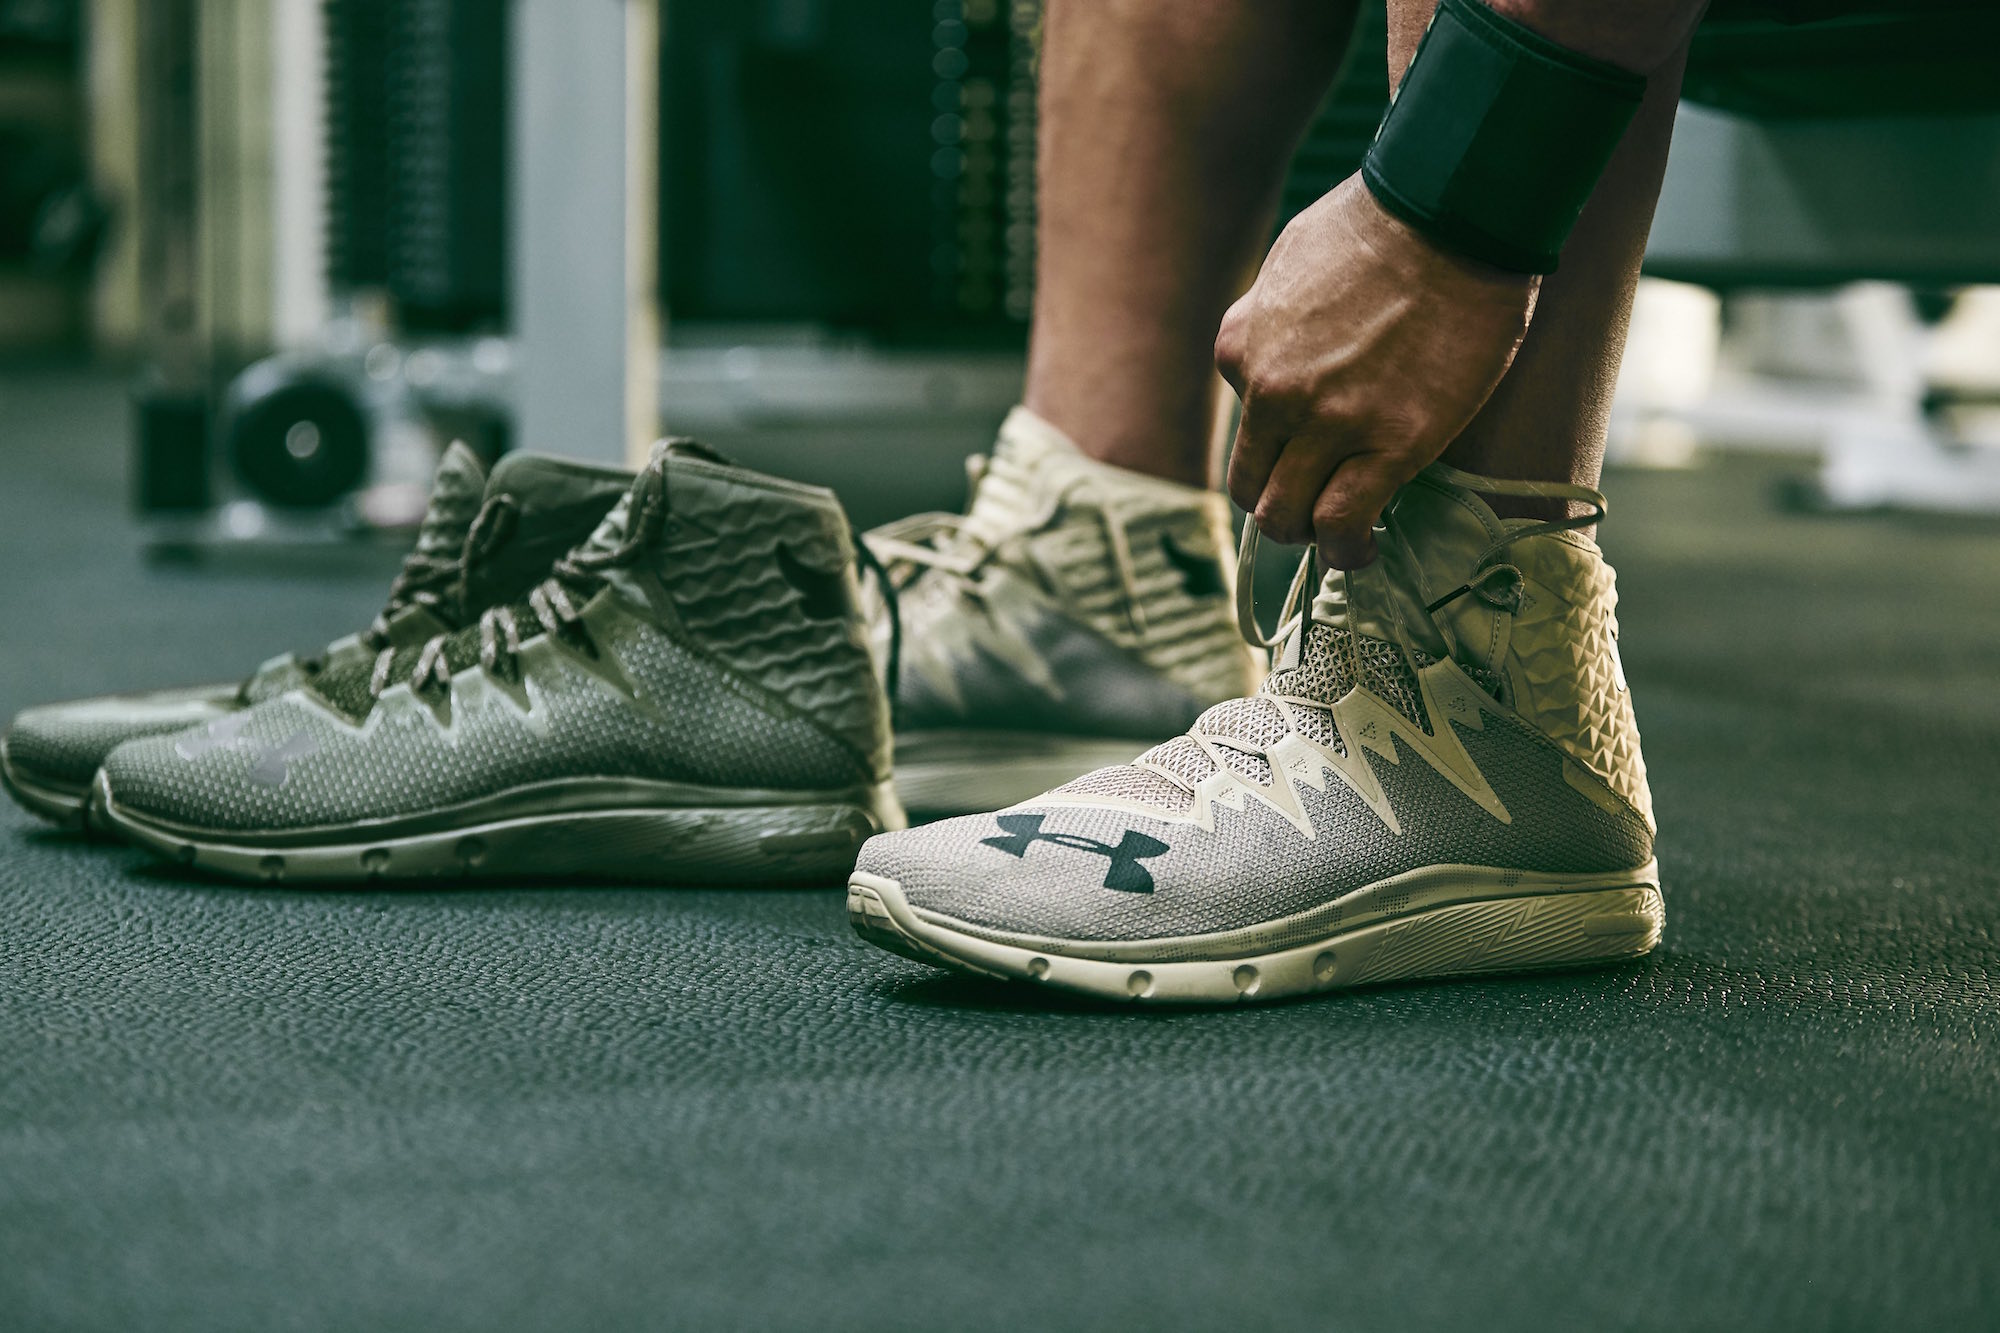 Under Armour Launches the Highlight Delta 2, a Worthy Upgrade - WearTesters